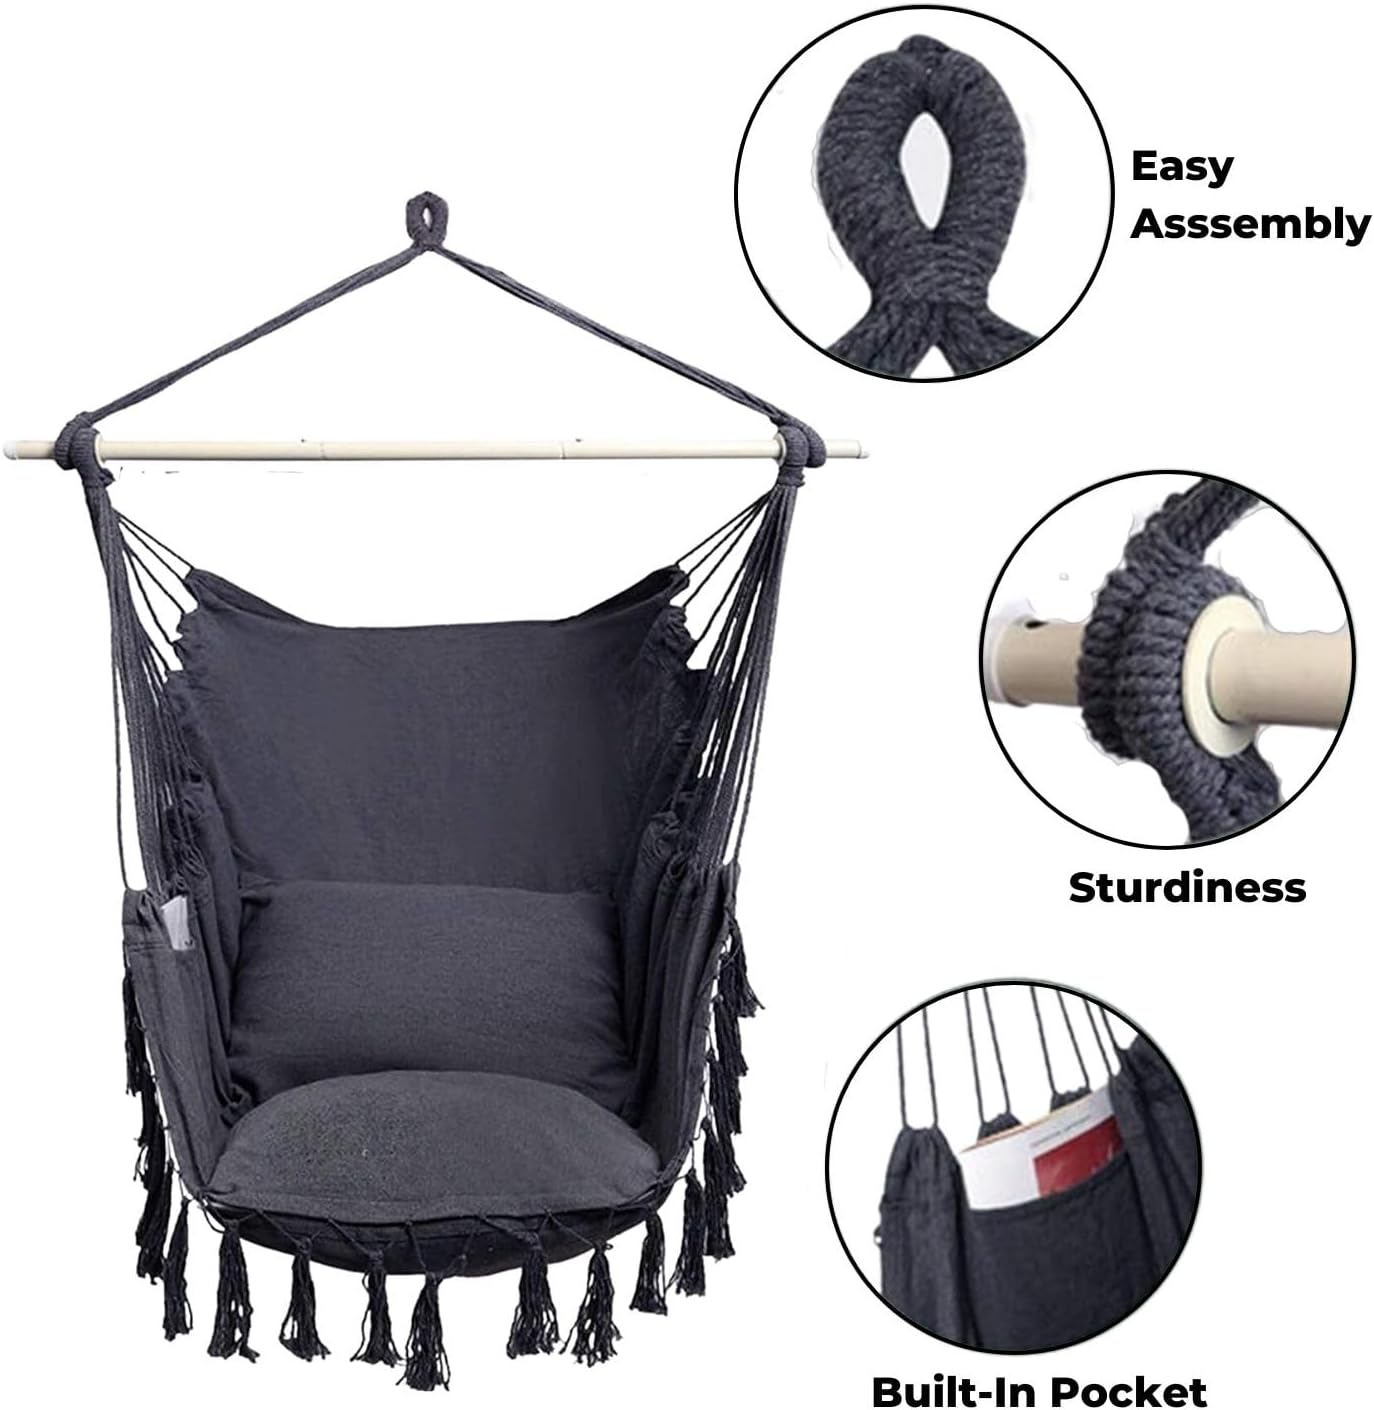 NOVEDEN Hammock Chair Hanging Rope Swing with 2 Seat Cushions Included (Dark Grey)